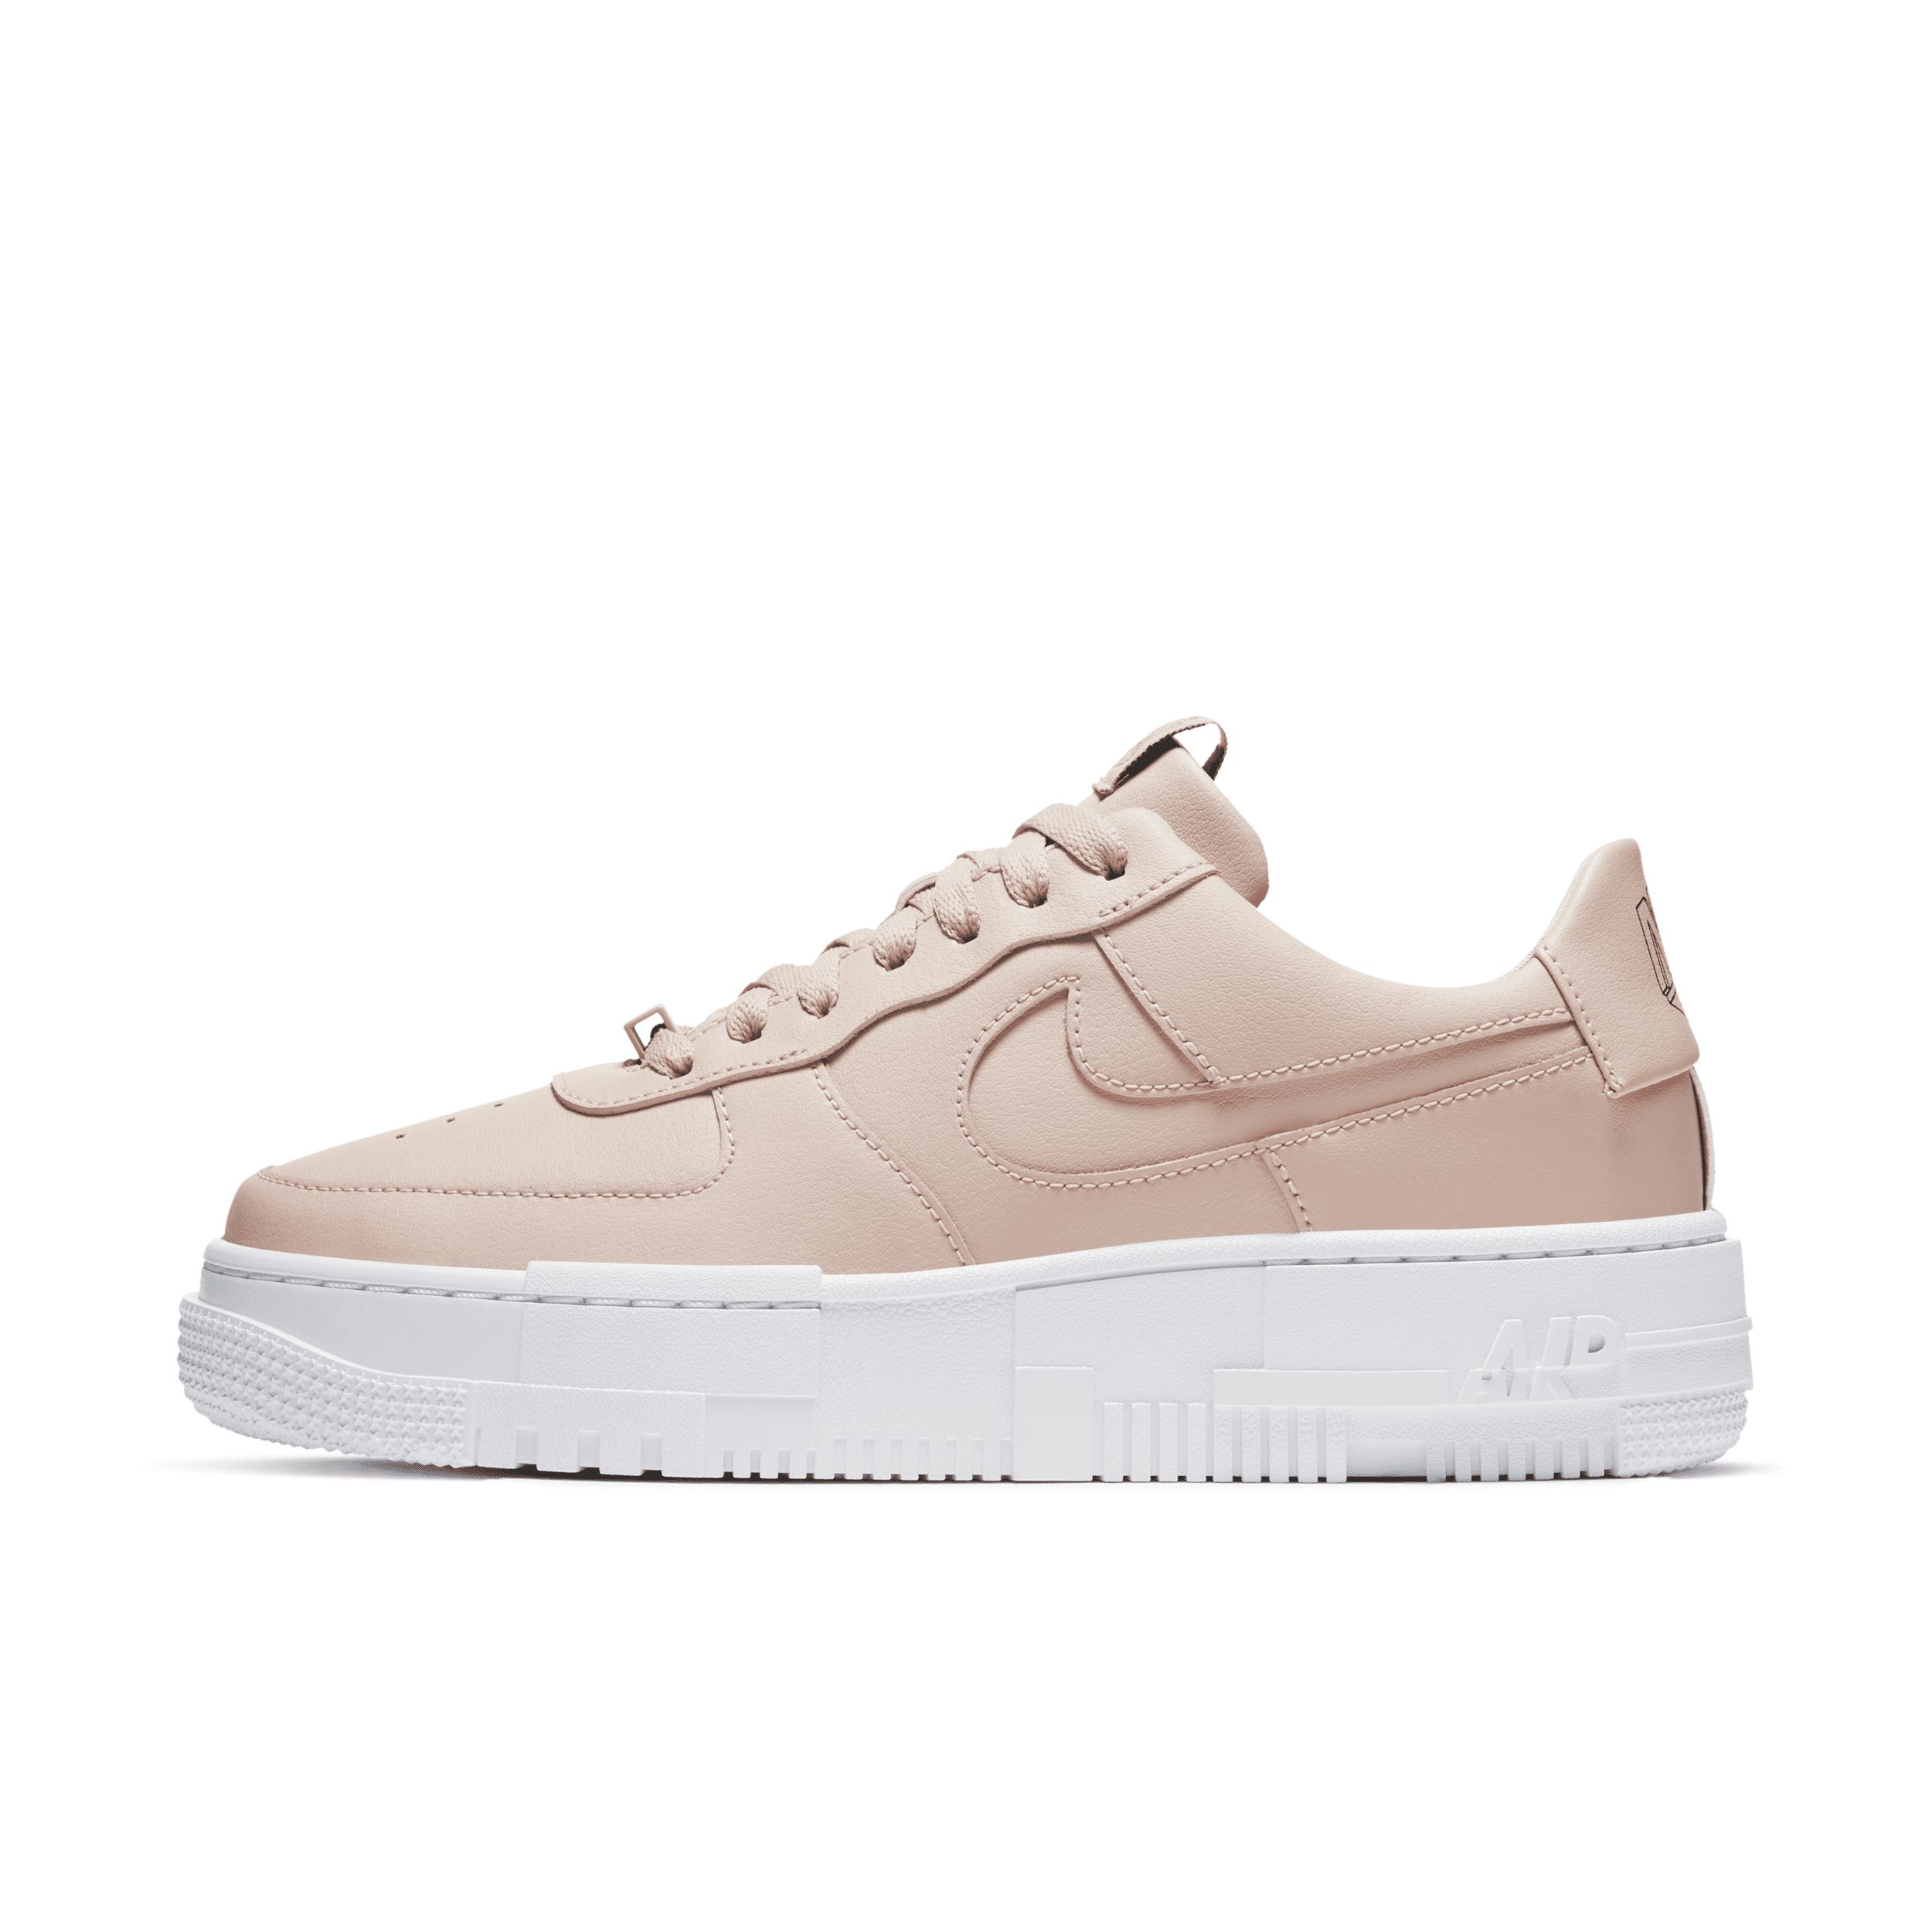 Nike Women's Air Force 1 Pixel Shoes in Brown, Size: 11.5 | CK6649-200 | Nike (US)